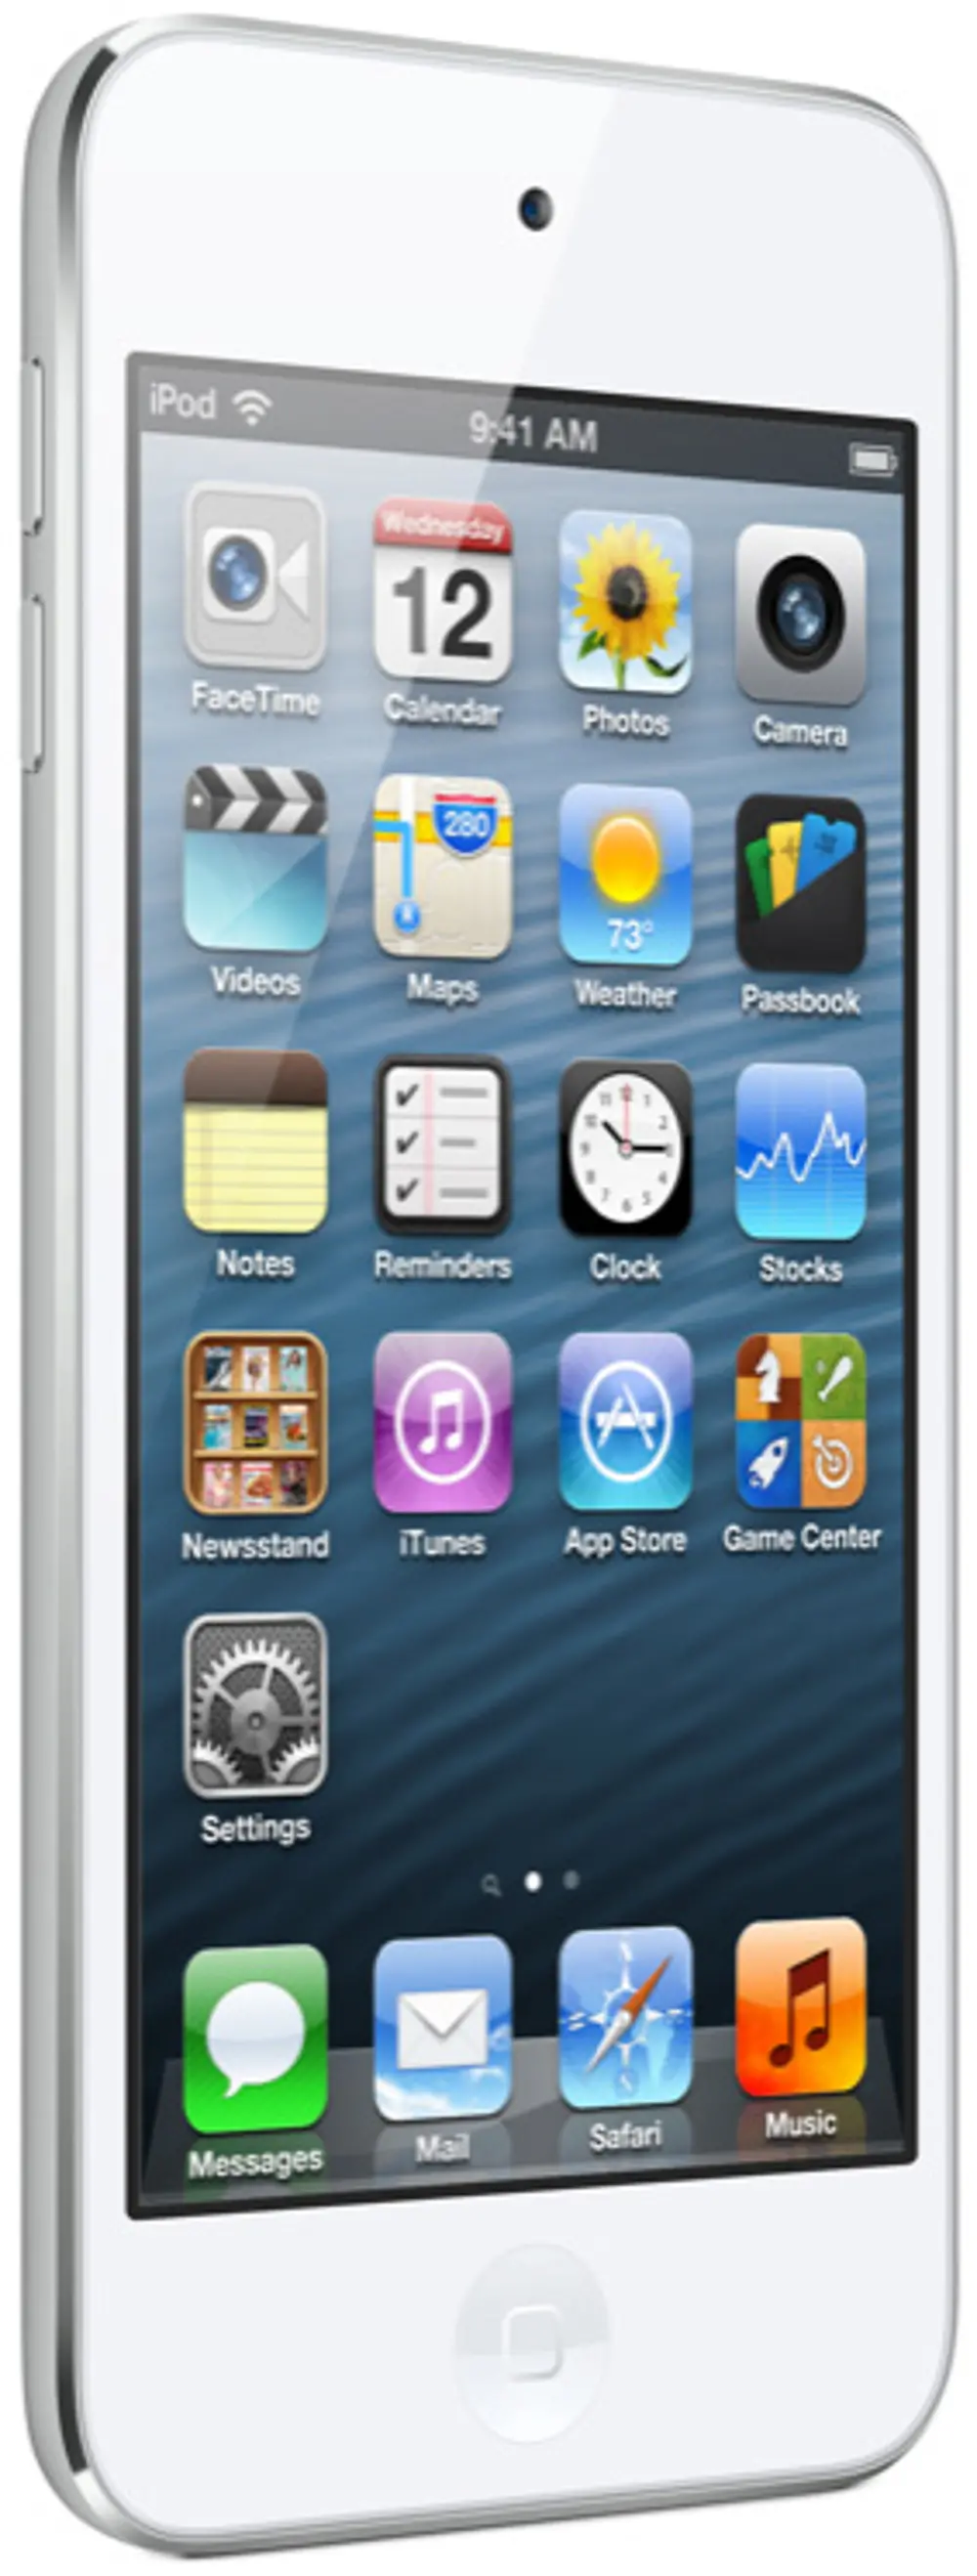 MD720LLA Apple iPod touch 32GB - White -1